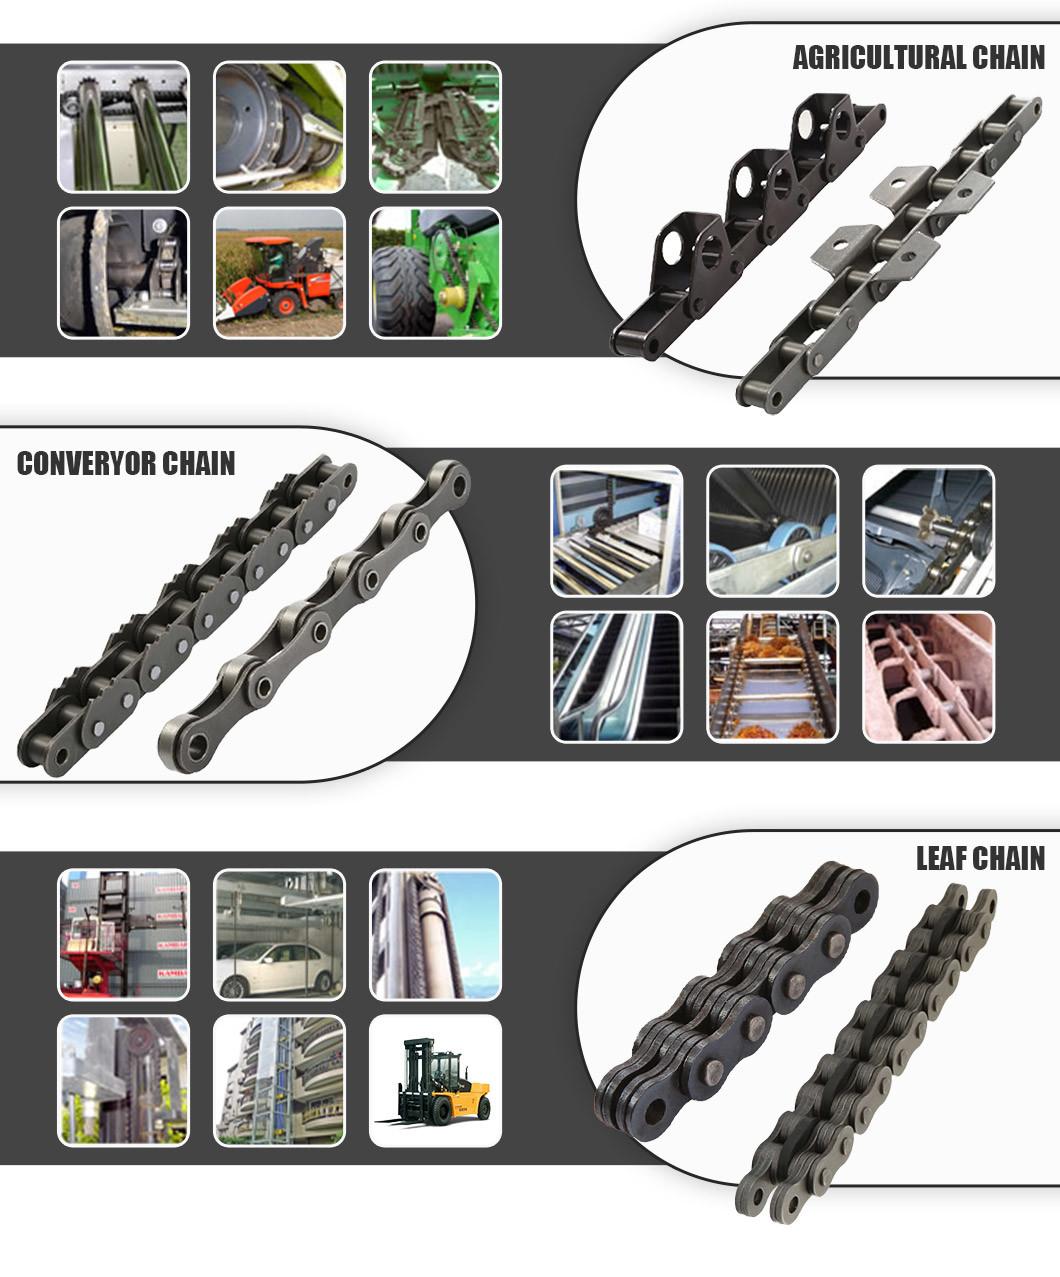 Made-to-Order Alloy/Carbon Steel Transmission Agricultural Chain 38.4rsdf7, 38.4rsdf8